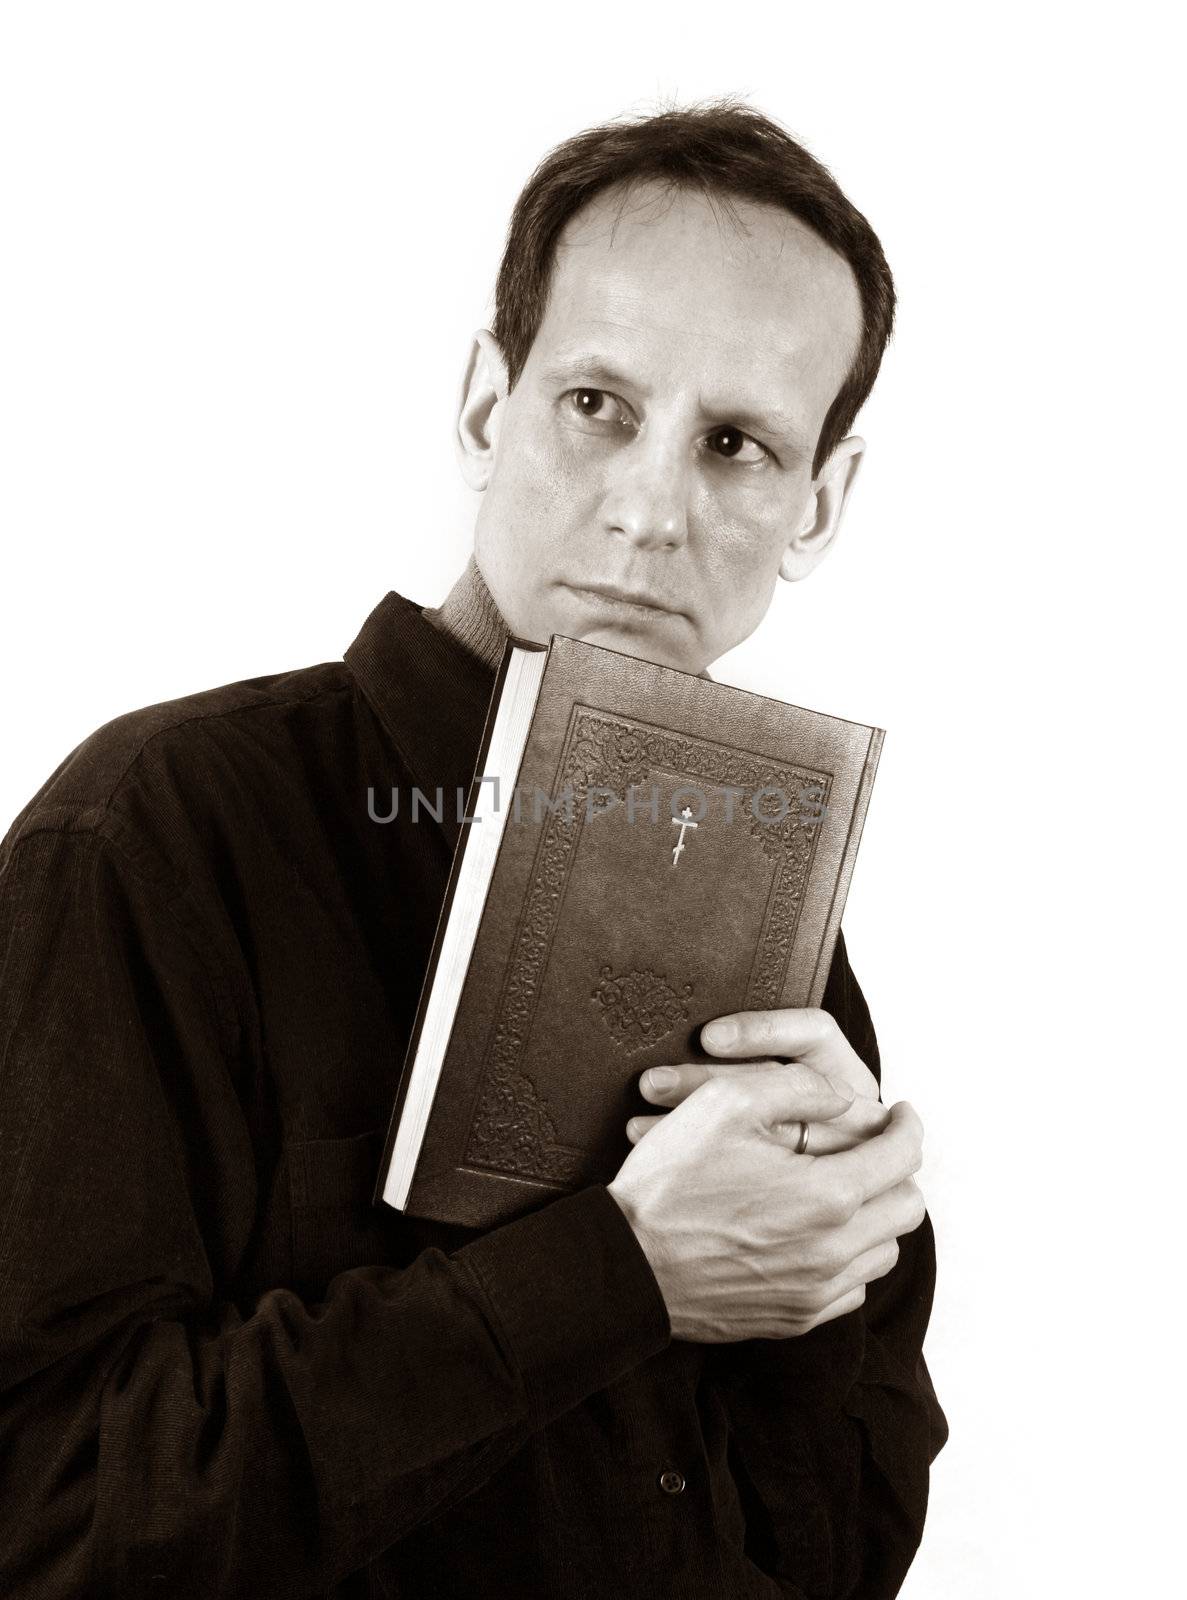 Thoughtful the man with the bible on a light background